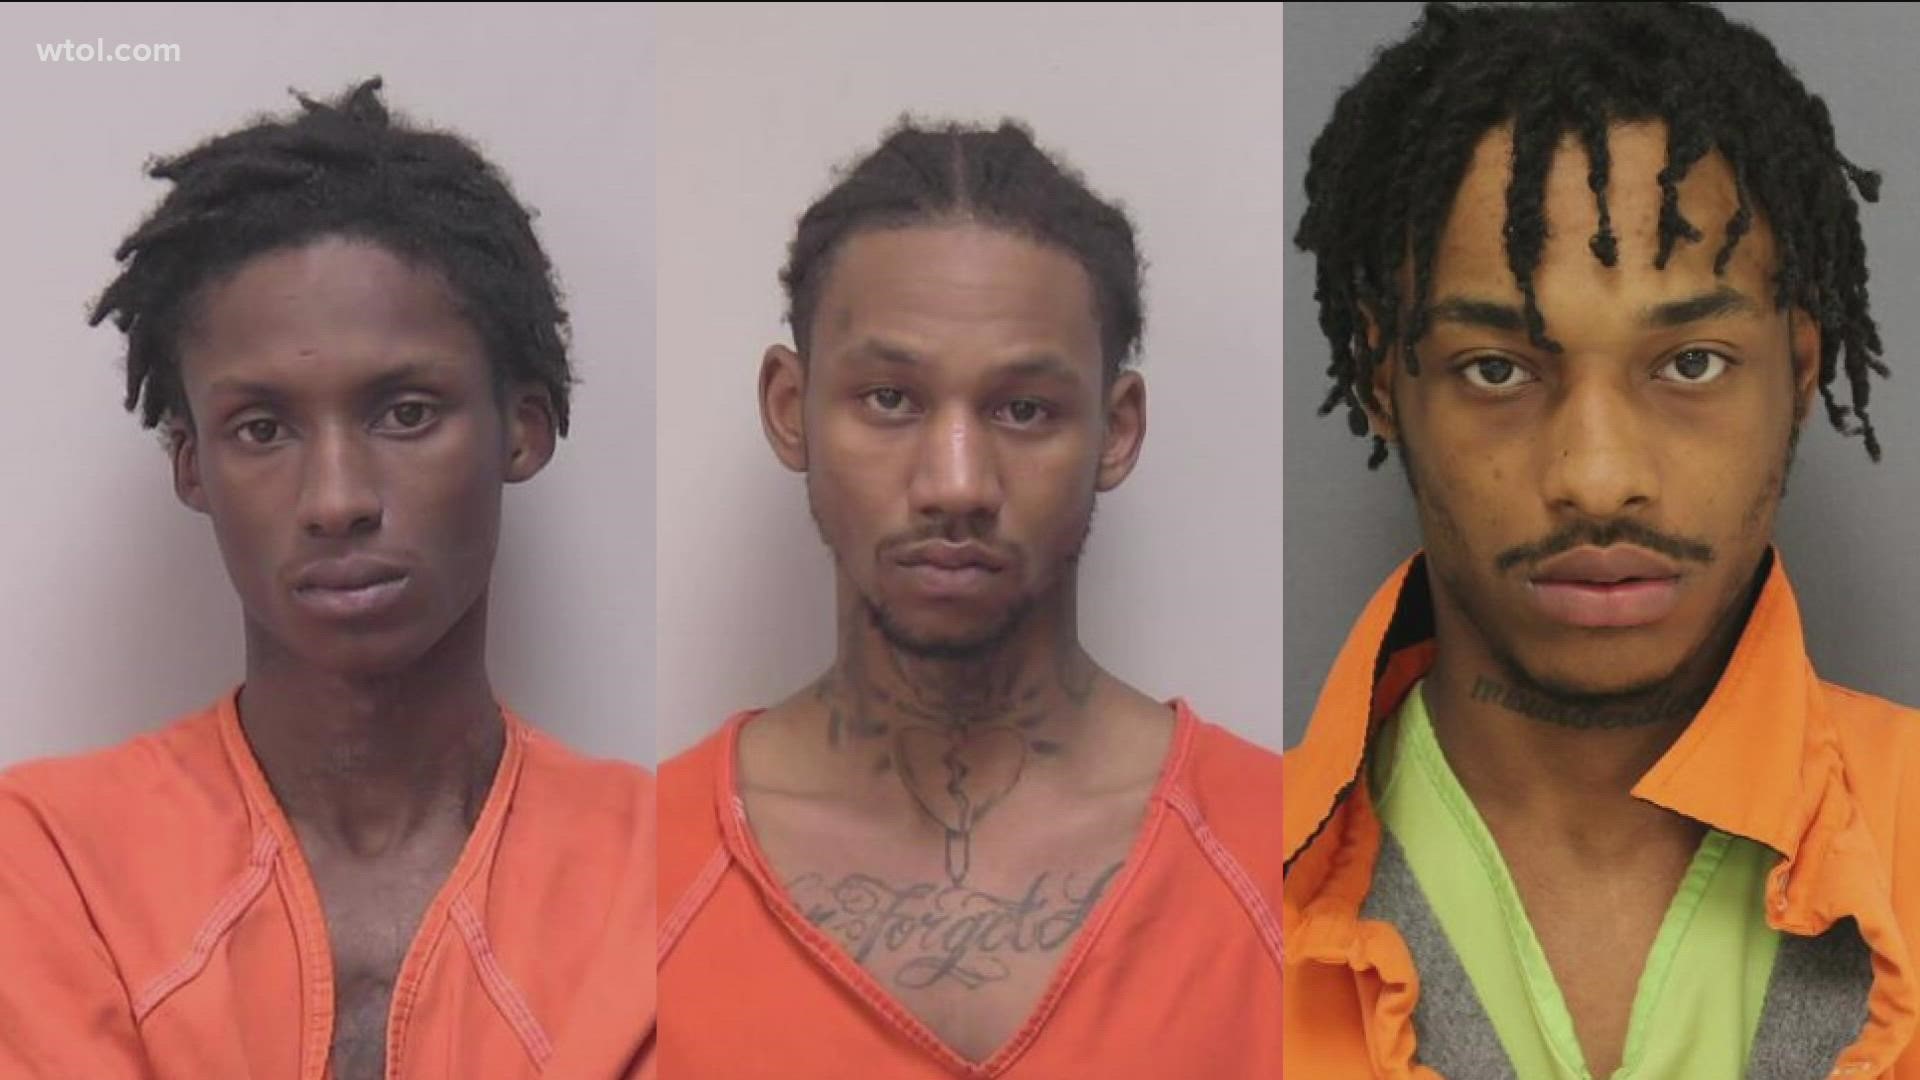 It is unclear when the three men will appear in court. Officials said details on the indictment will be released Monday.